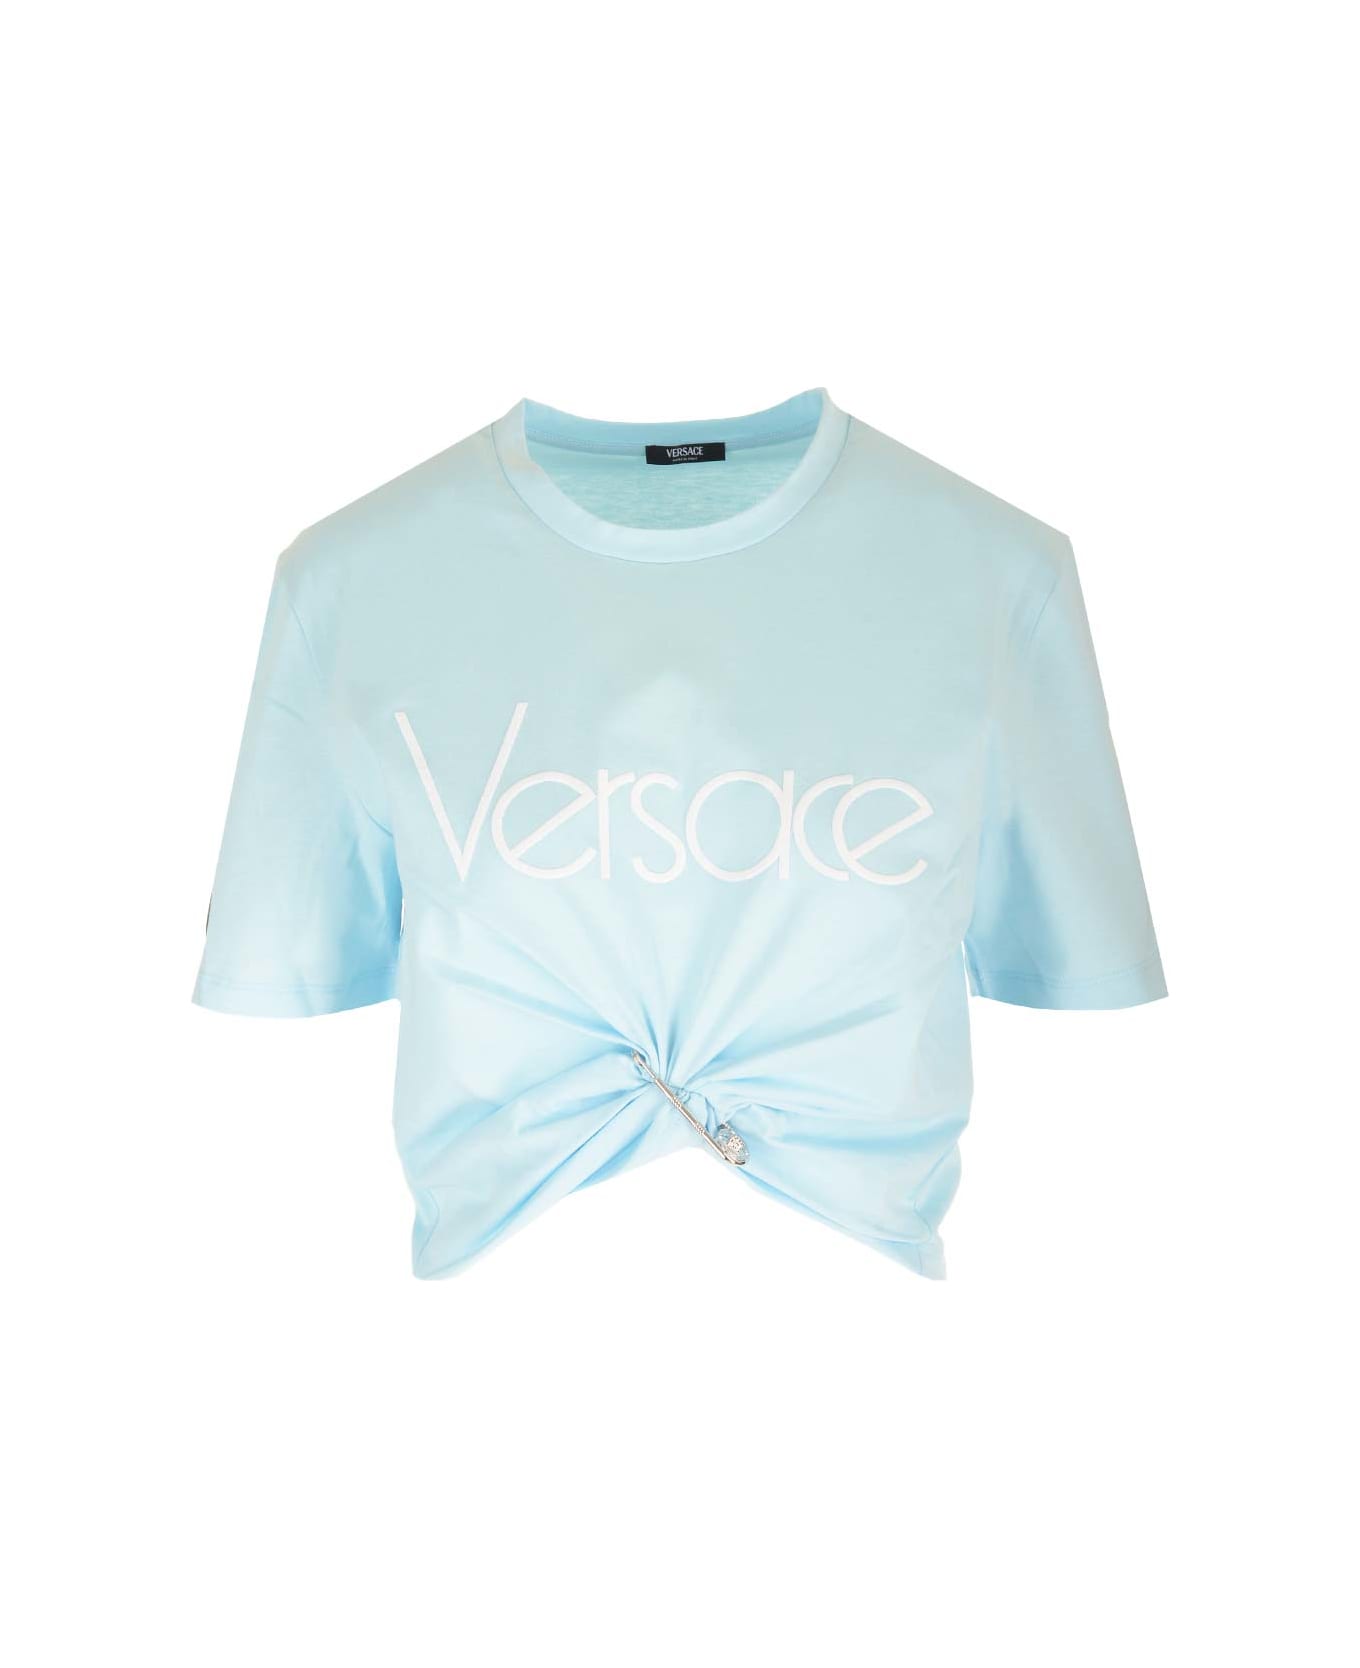 Versace Safety Pin Detail Top - BLUE